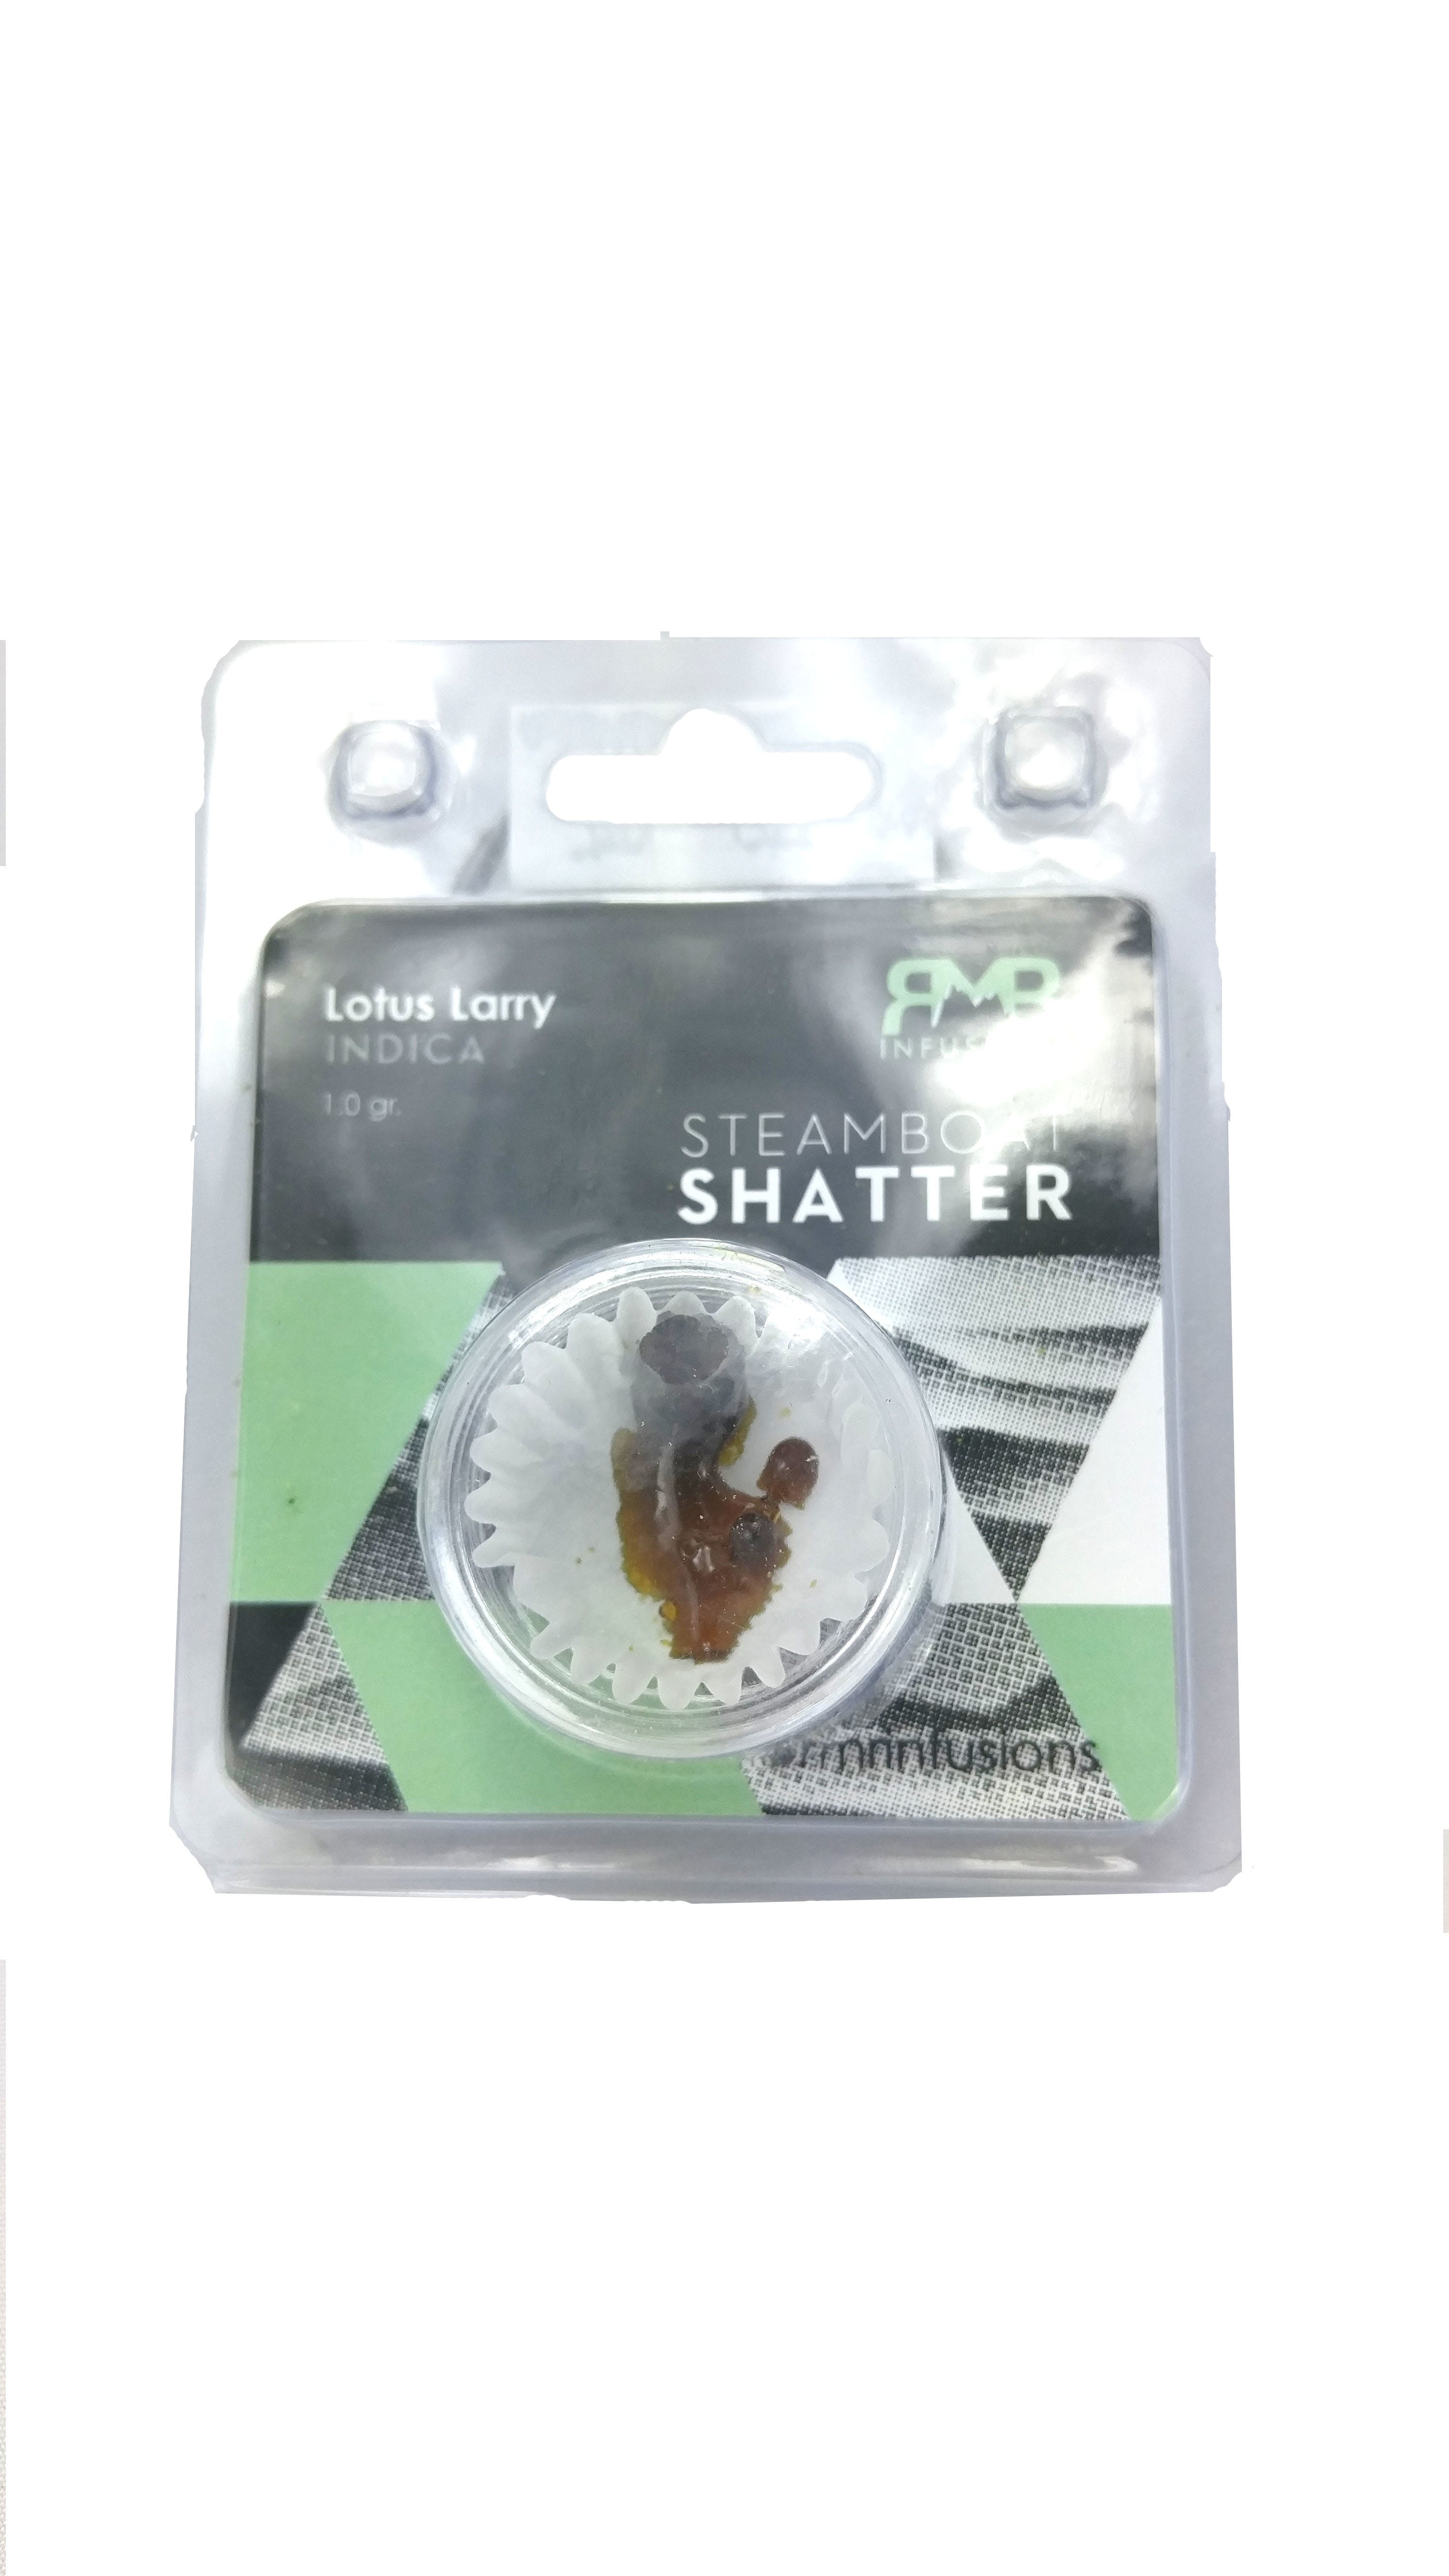 concentrate-rmr-shatter-1g